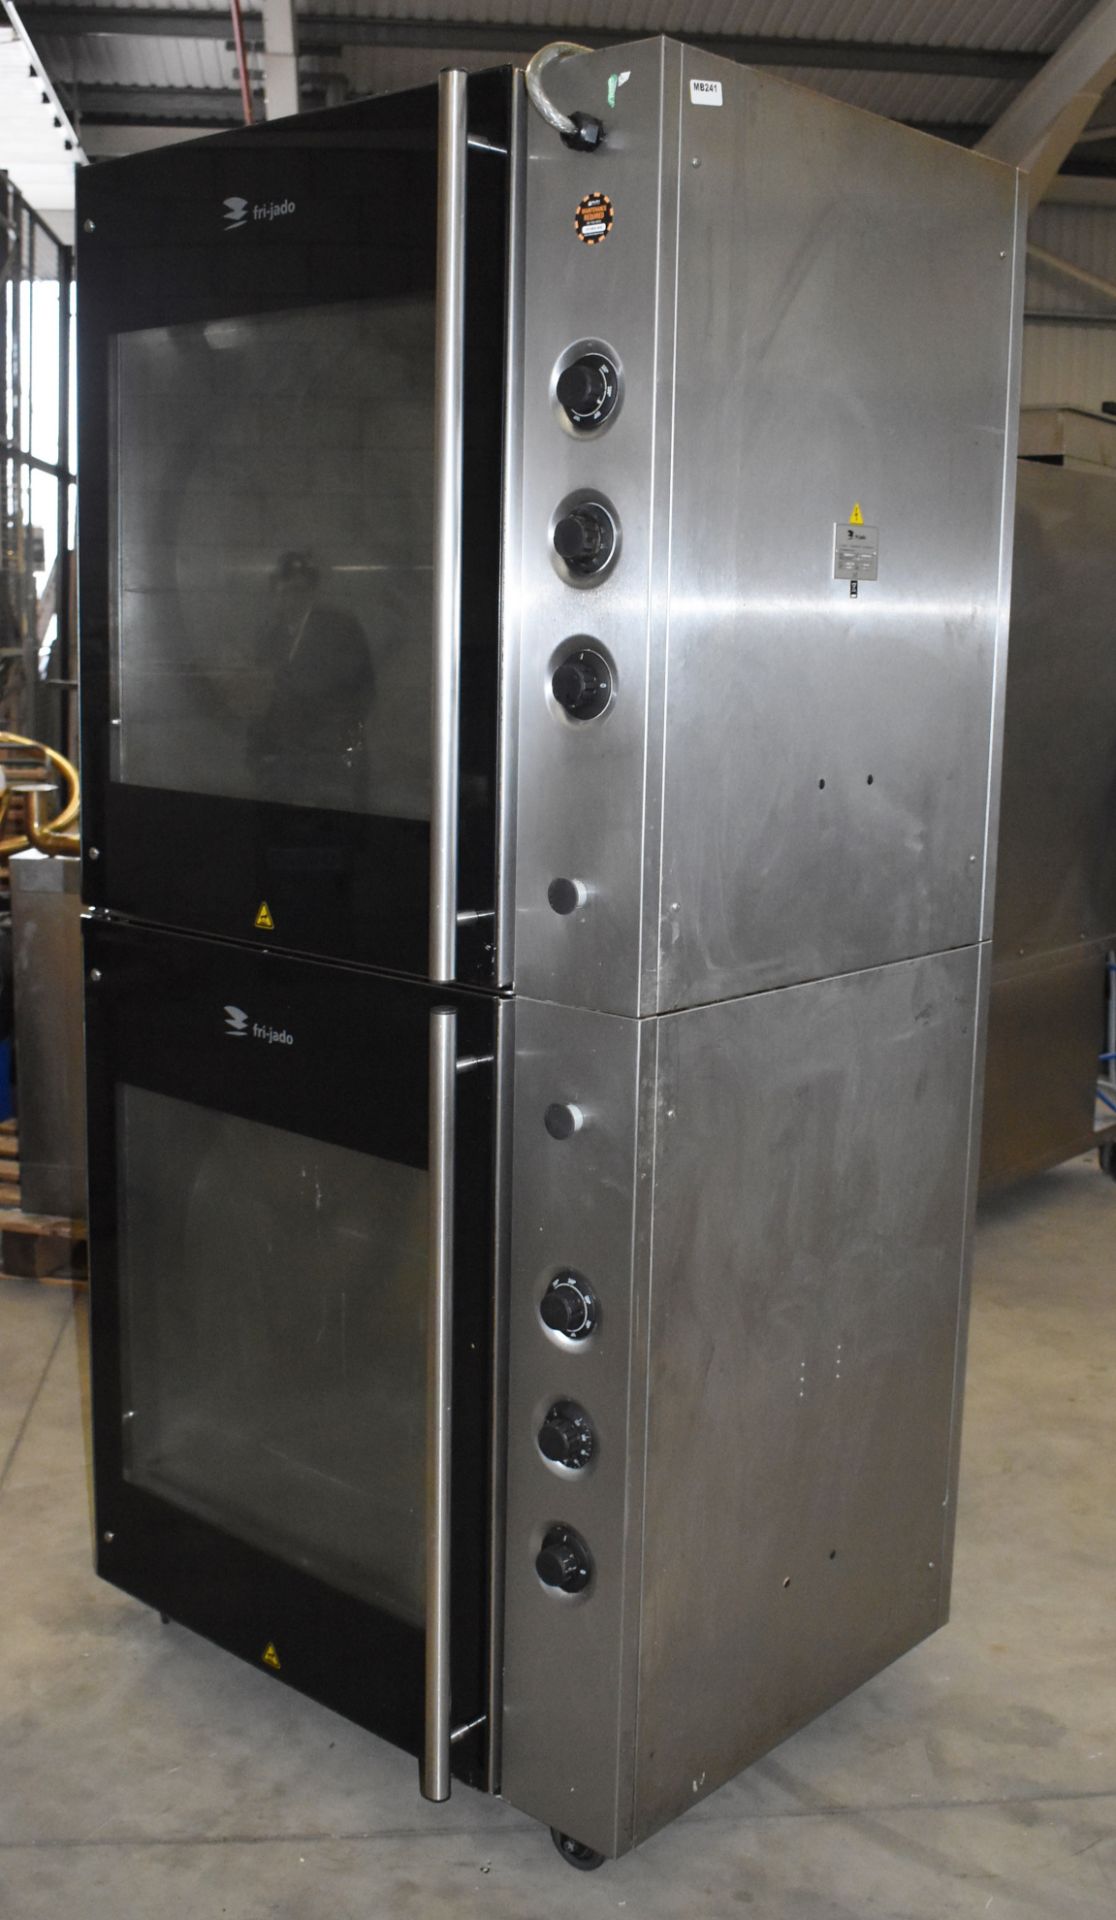 1 x Fri-Jado TDR8+8 Manual Chicken Rotisserie Double Oven - Holds 80 Chickens - CL453 - 3 Phase - Image 5 of 12